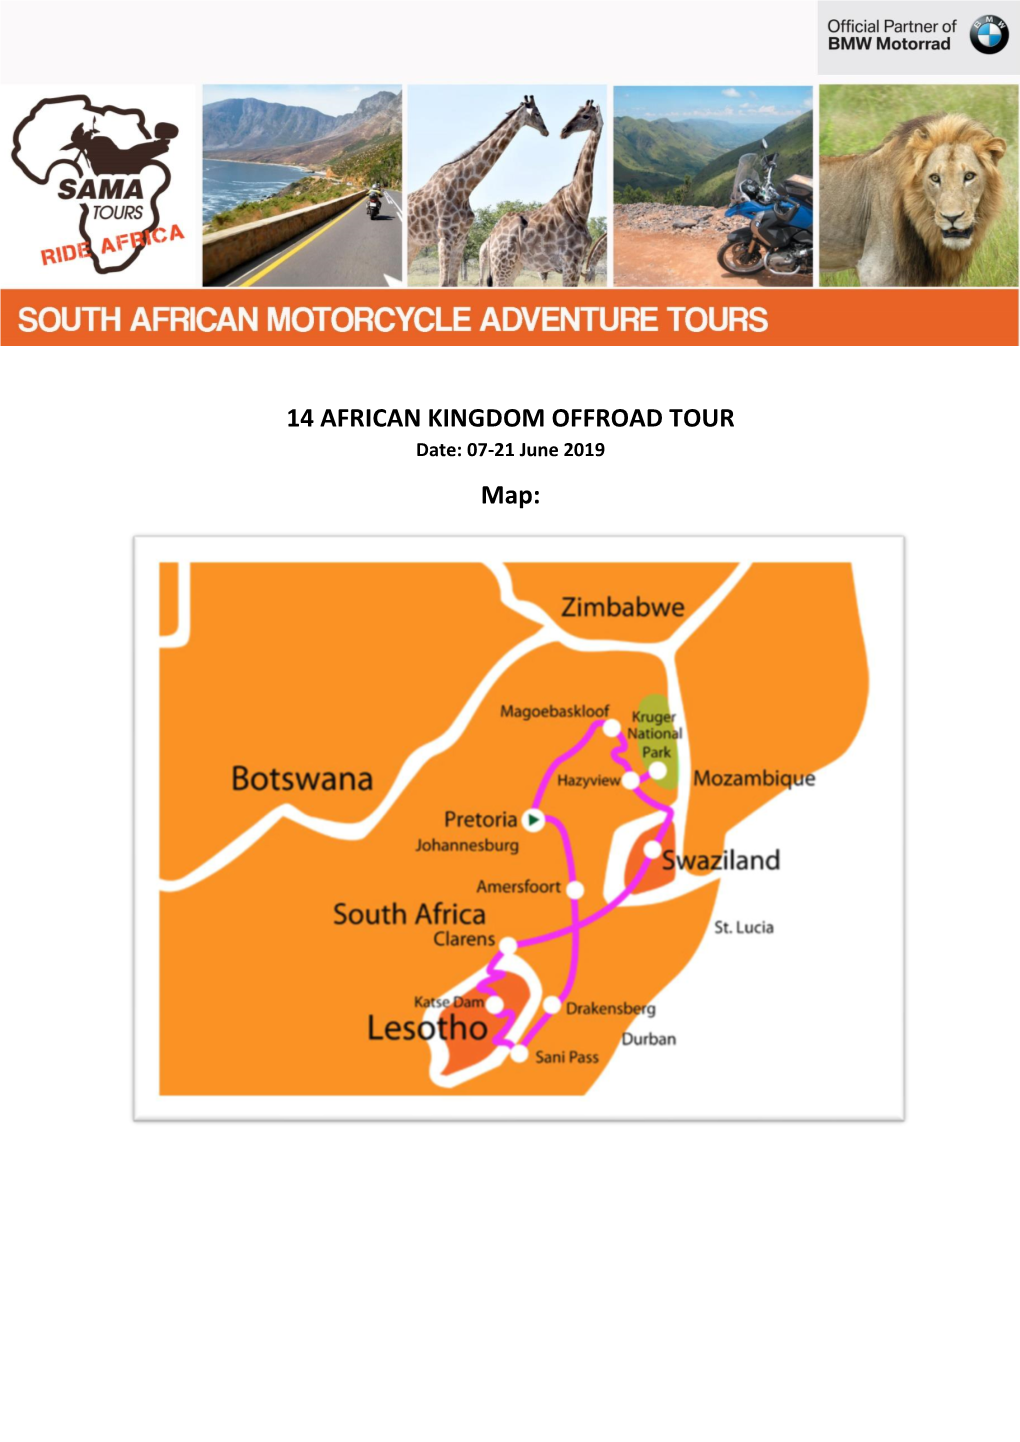 14 AFRICAN KINGDOM OFFROAD TOUR Map